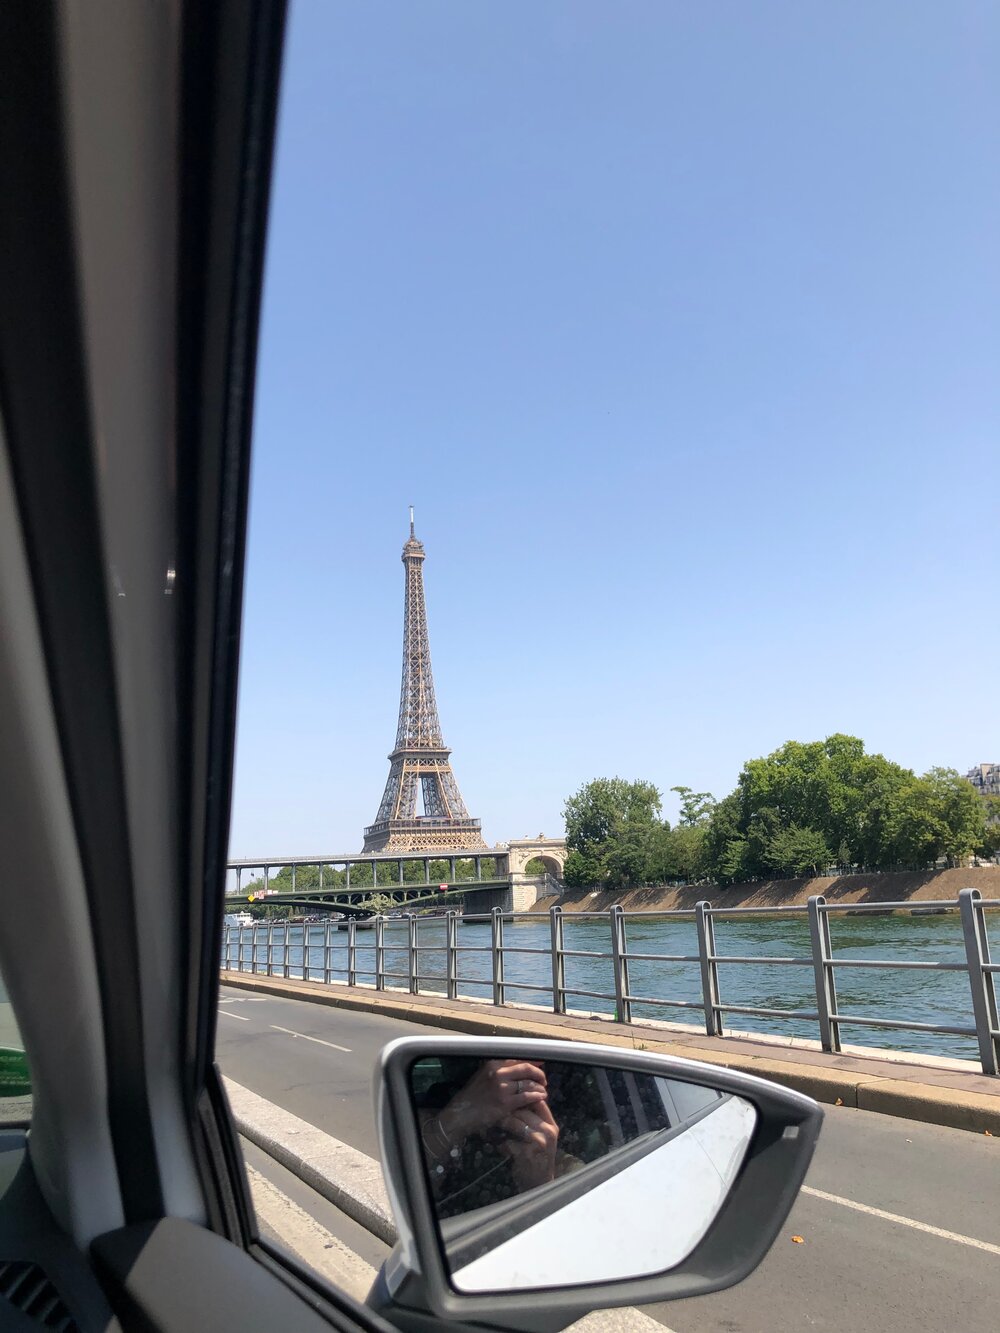  View of the Eiffel Tower while driving along the Seine 😍 